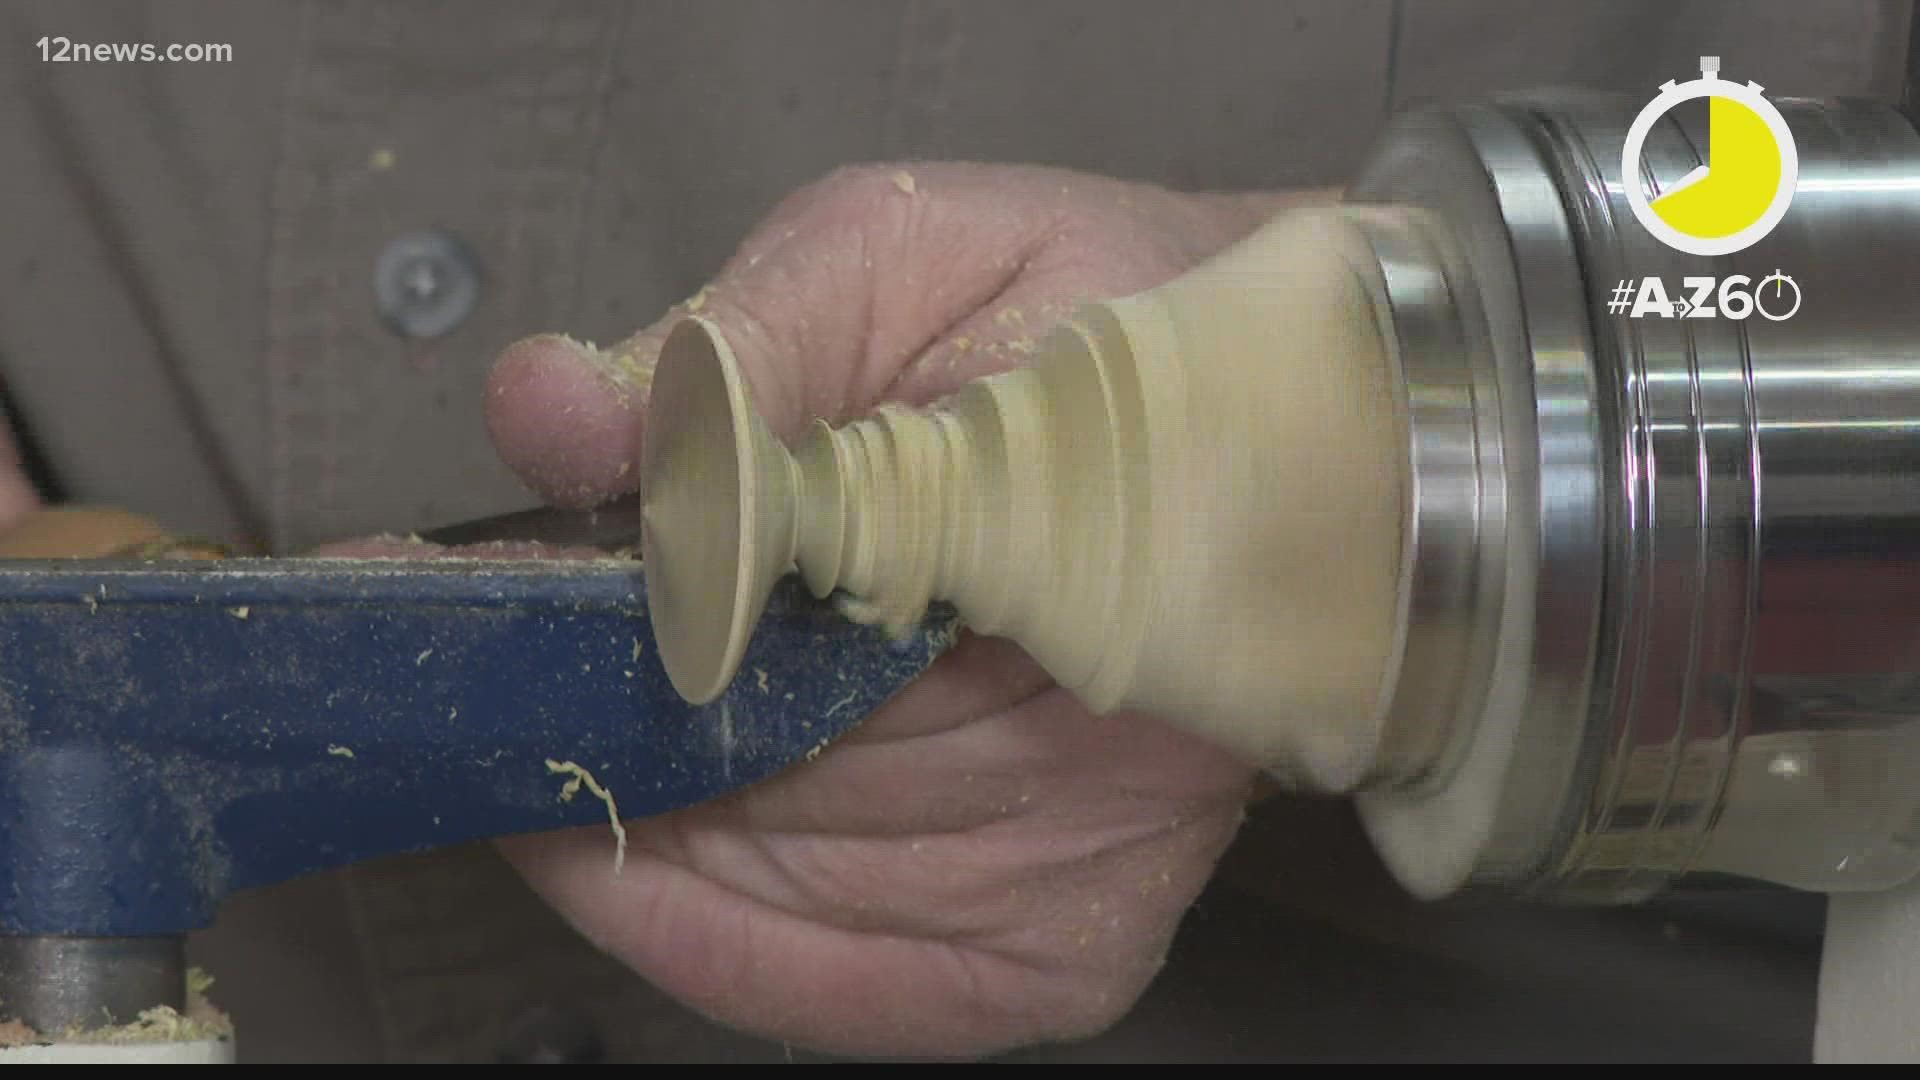 The Woodturners Association has kept the traditional practice of woodturning going and are opening it up to a new generation.